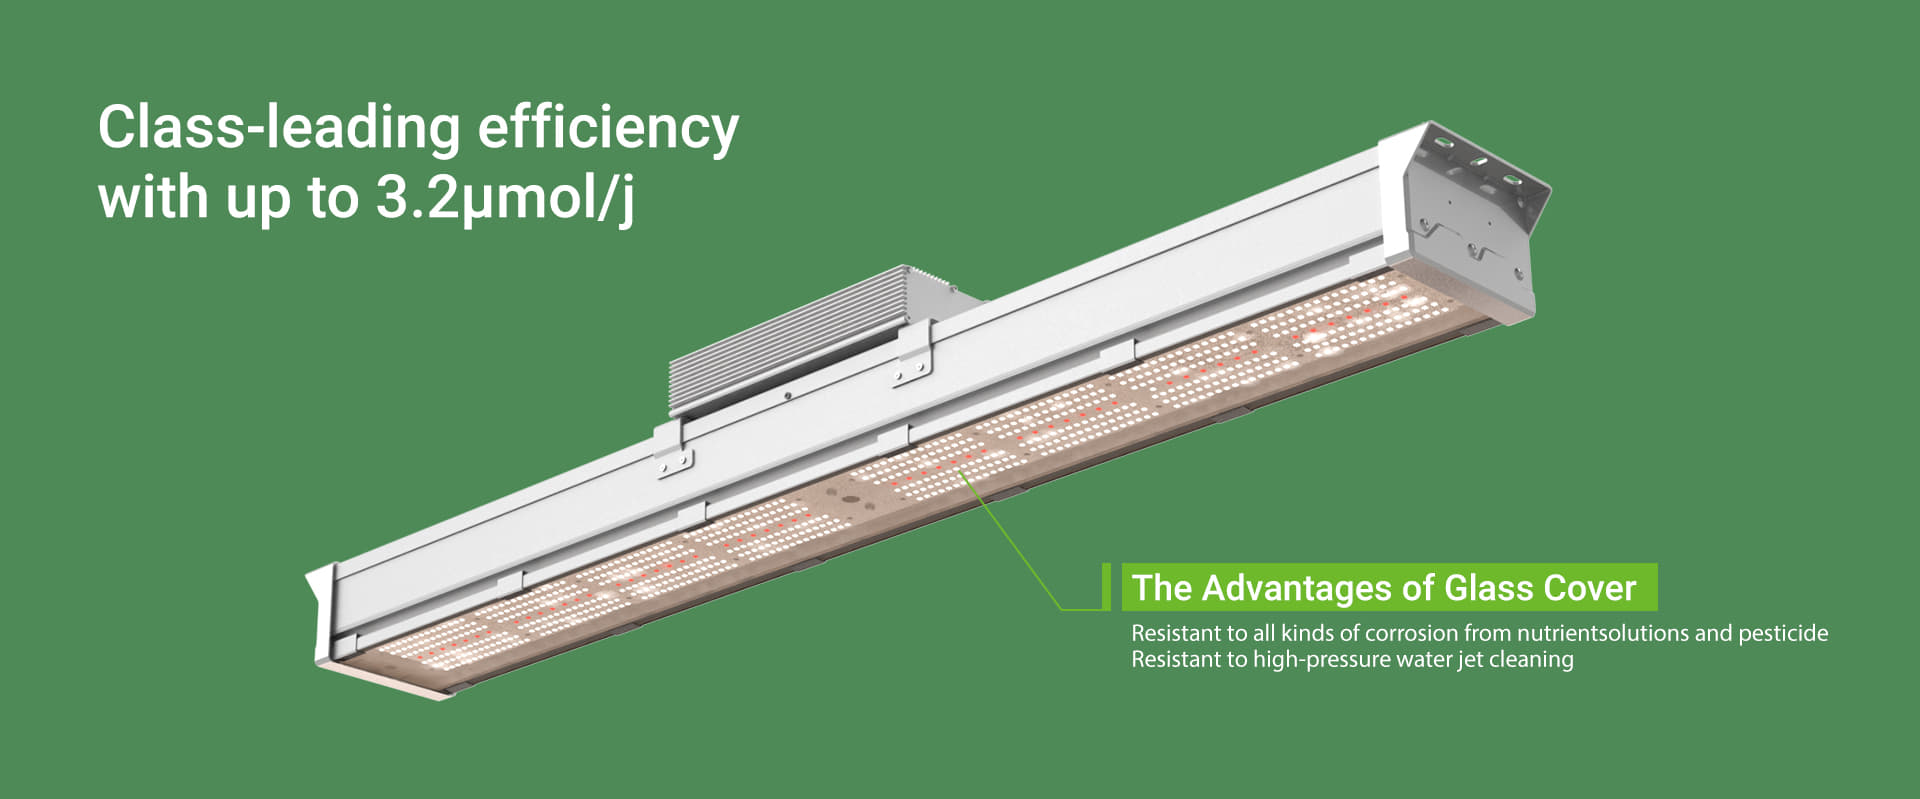 Class leading efficiency with up to 3.2µmolj